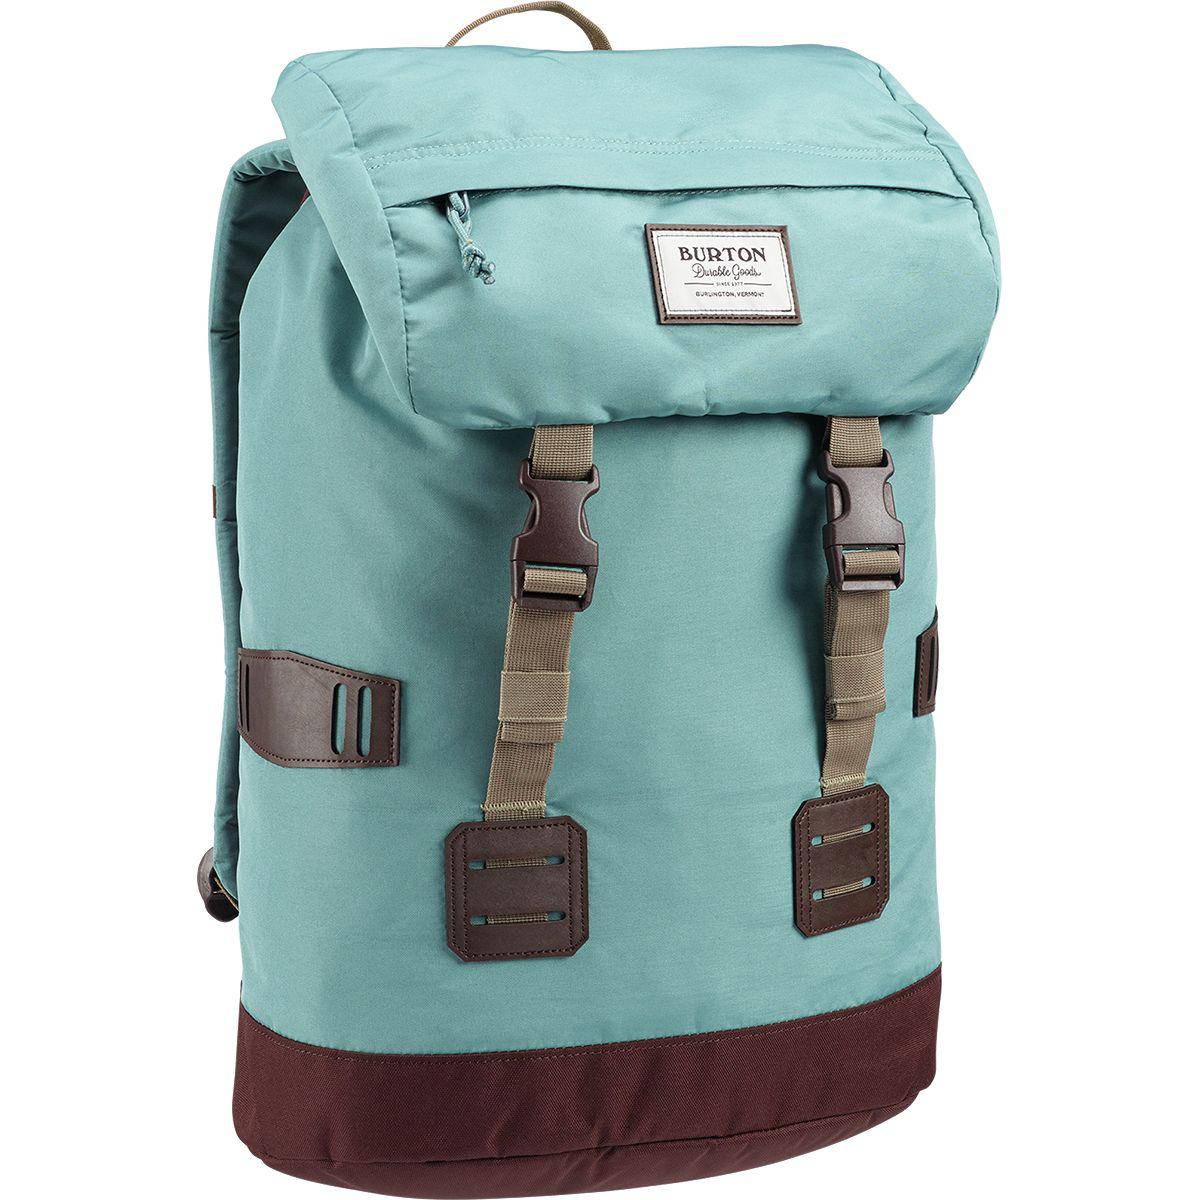 Burton Tinder 25l Backpack in Green - Lyst